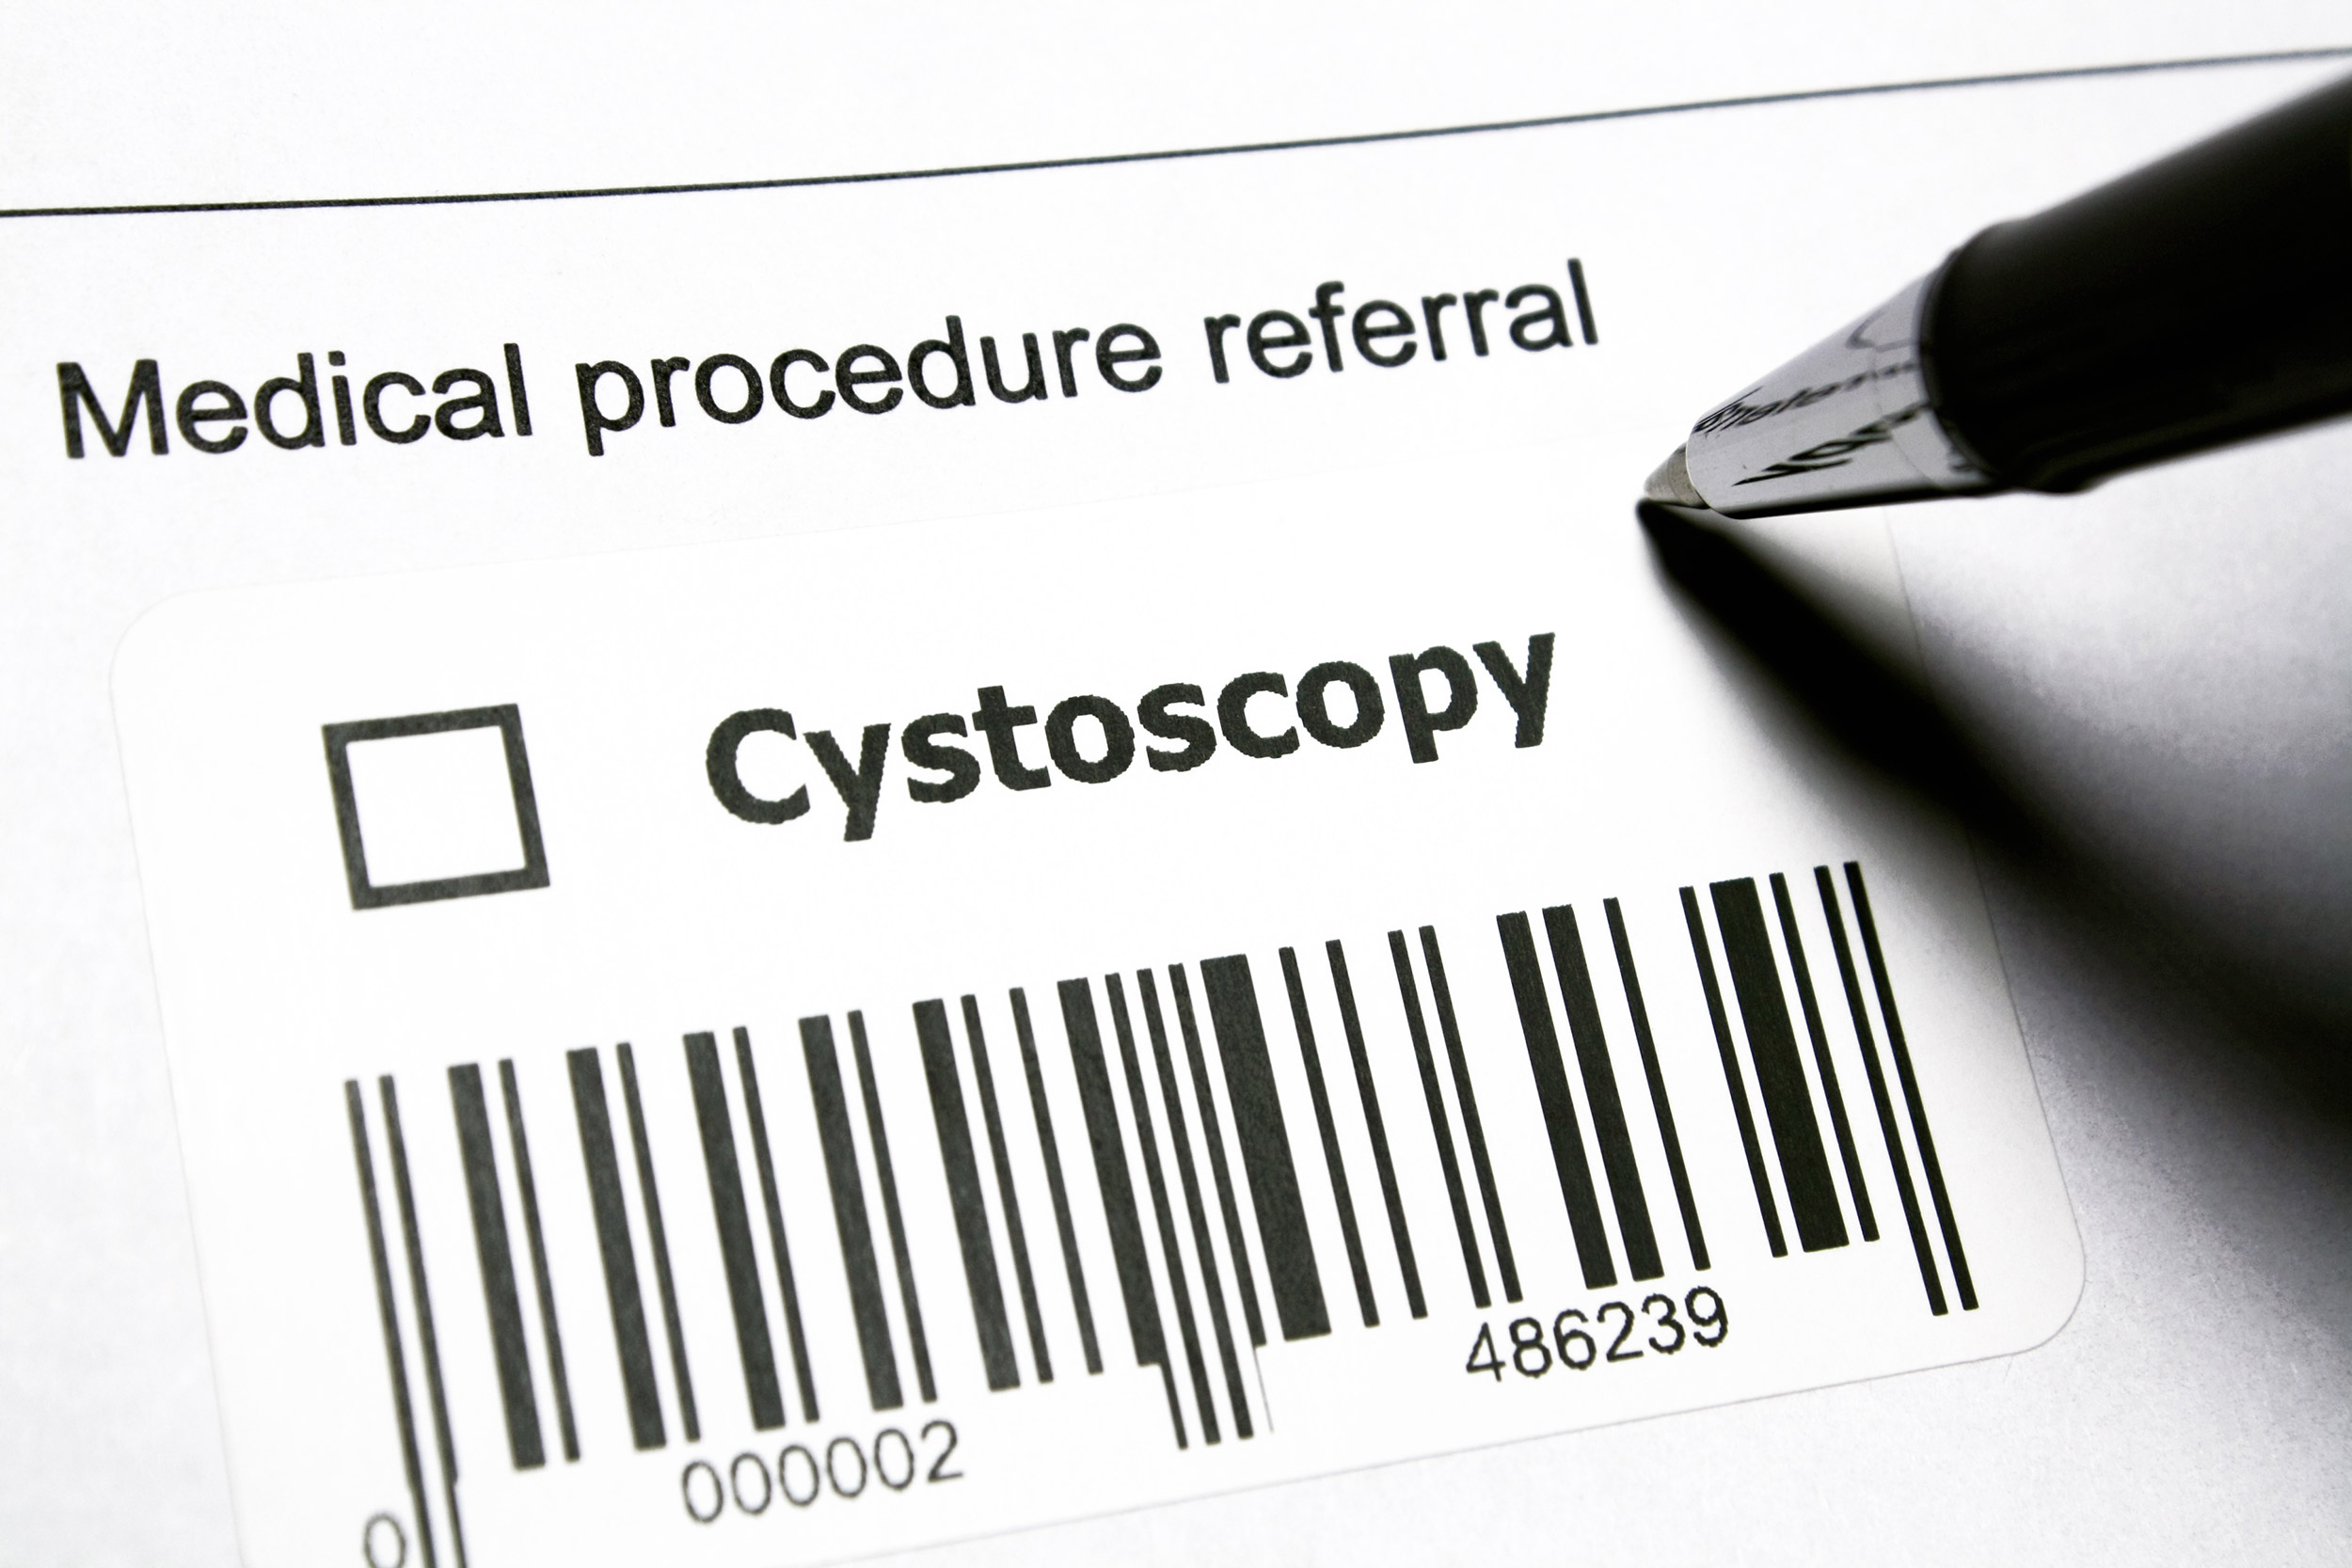 Study: Patients Prefer Single Use Cystoscopes — But Are They Willing to Pay For Them?